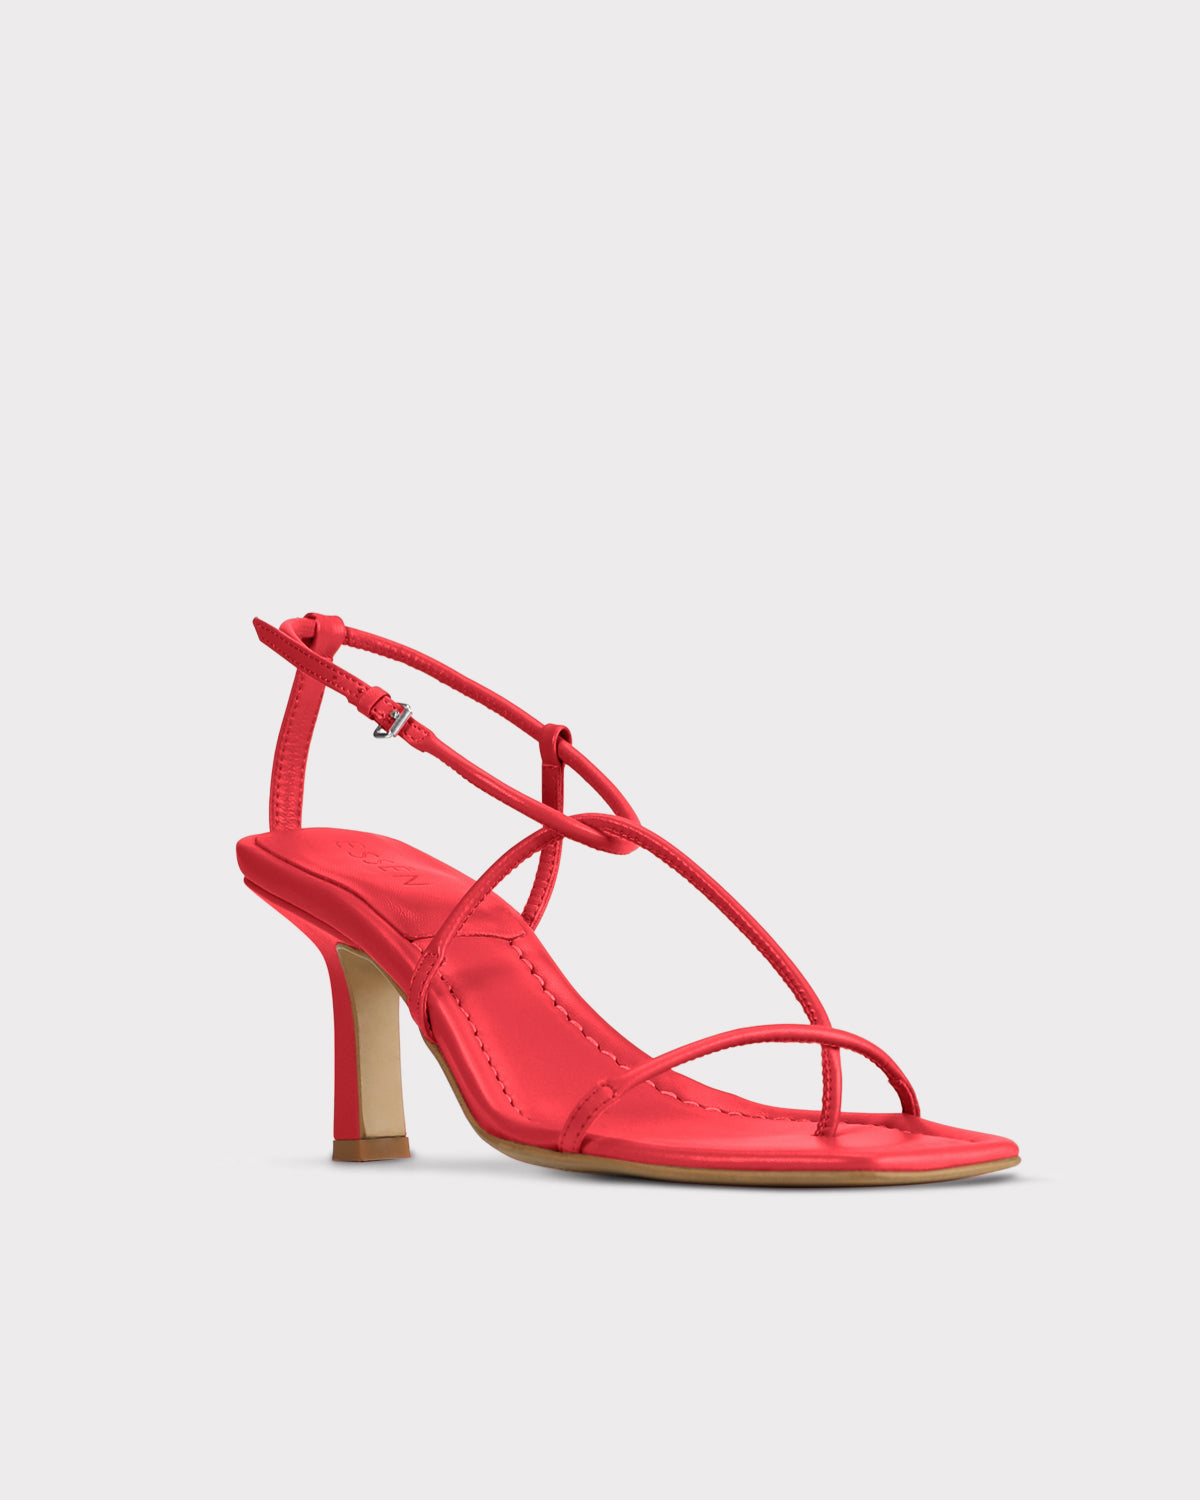 The Strappy Sandal - Red (PRE-ORDER)